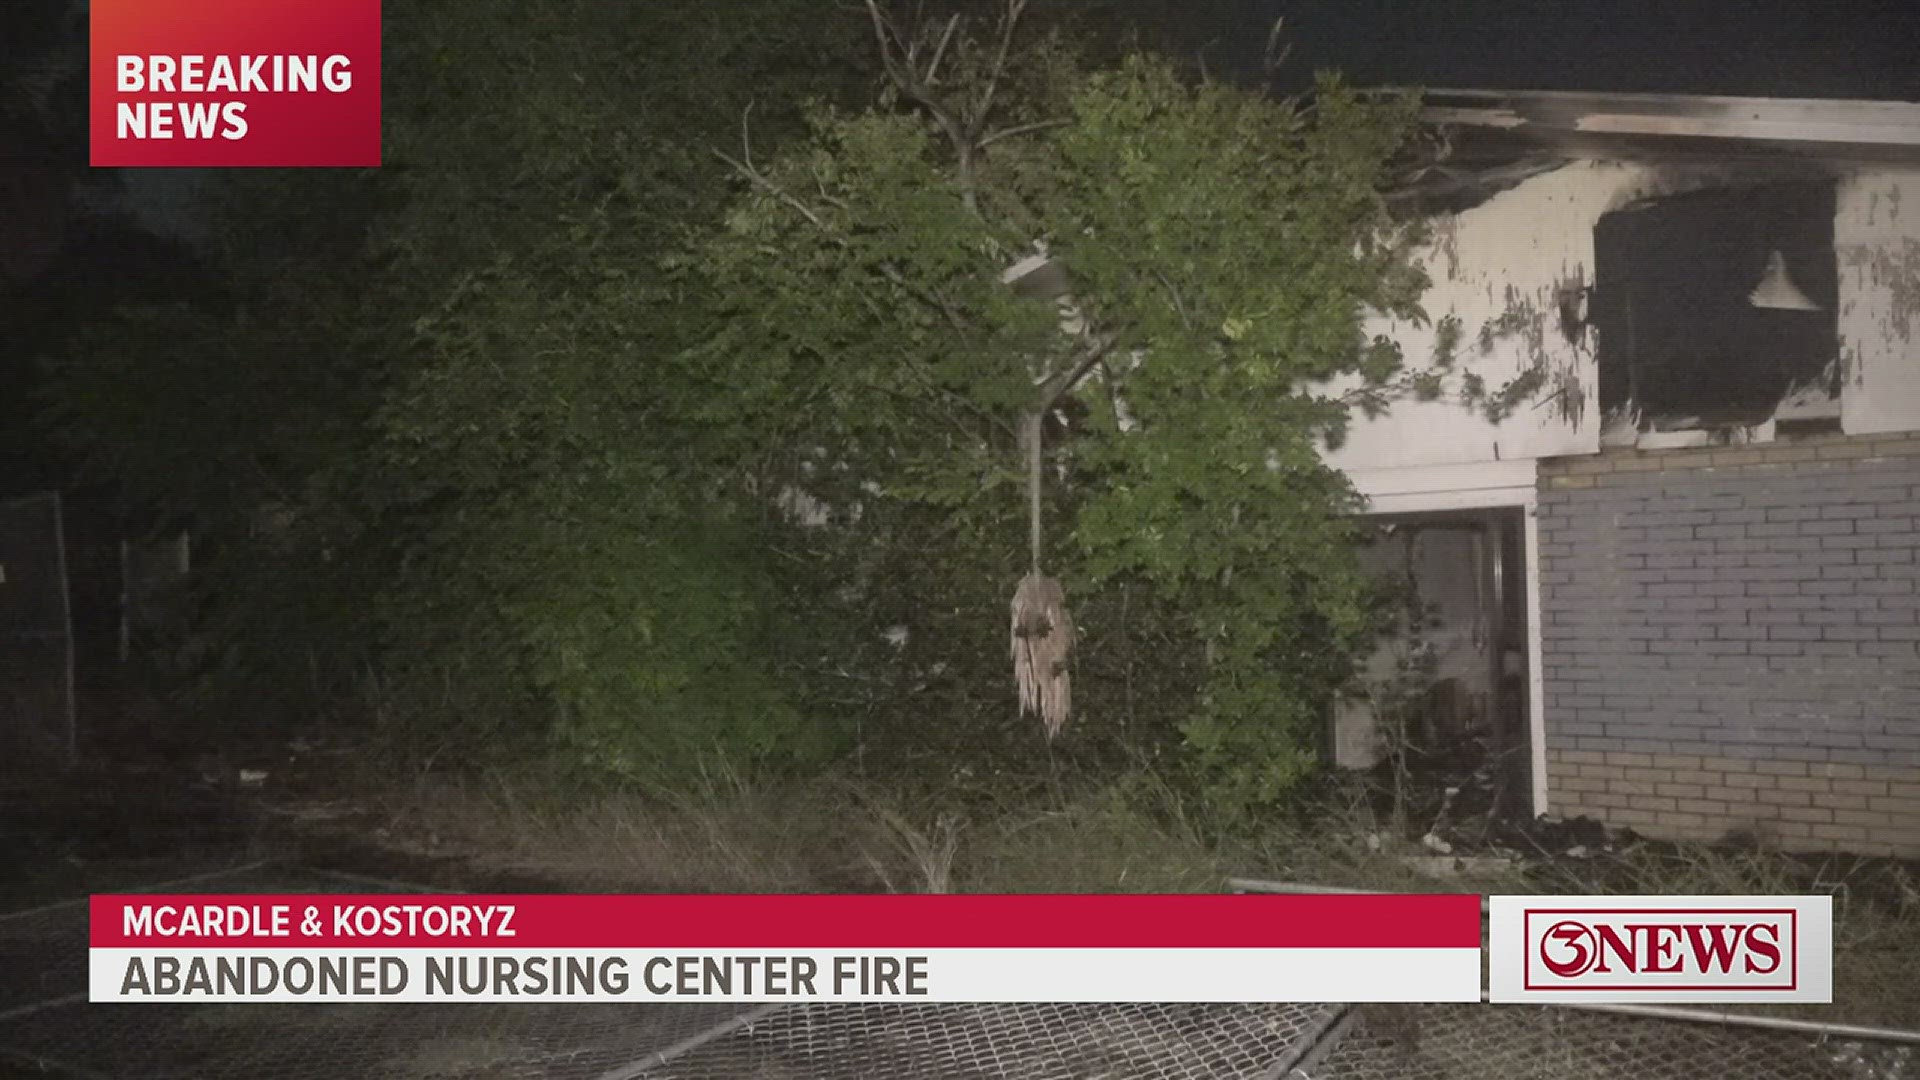 CCFD said it appeared that at least one person was living in the abandoned nursing home.